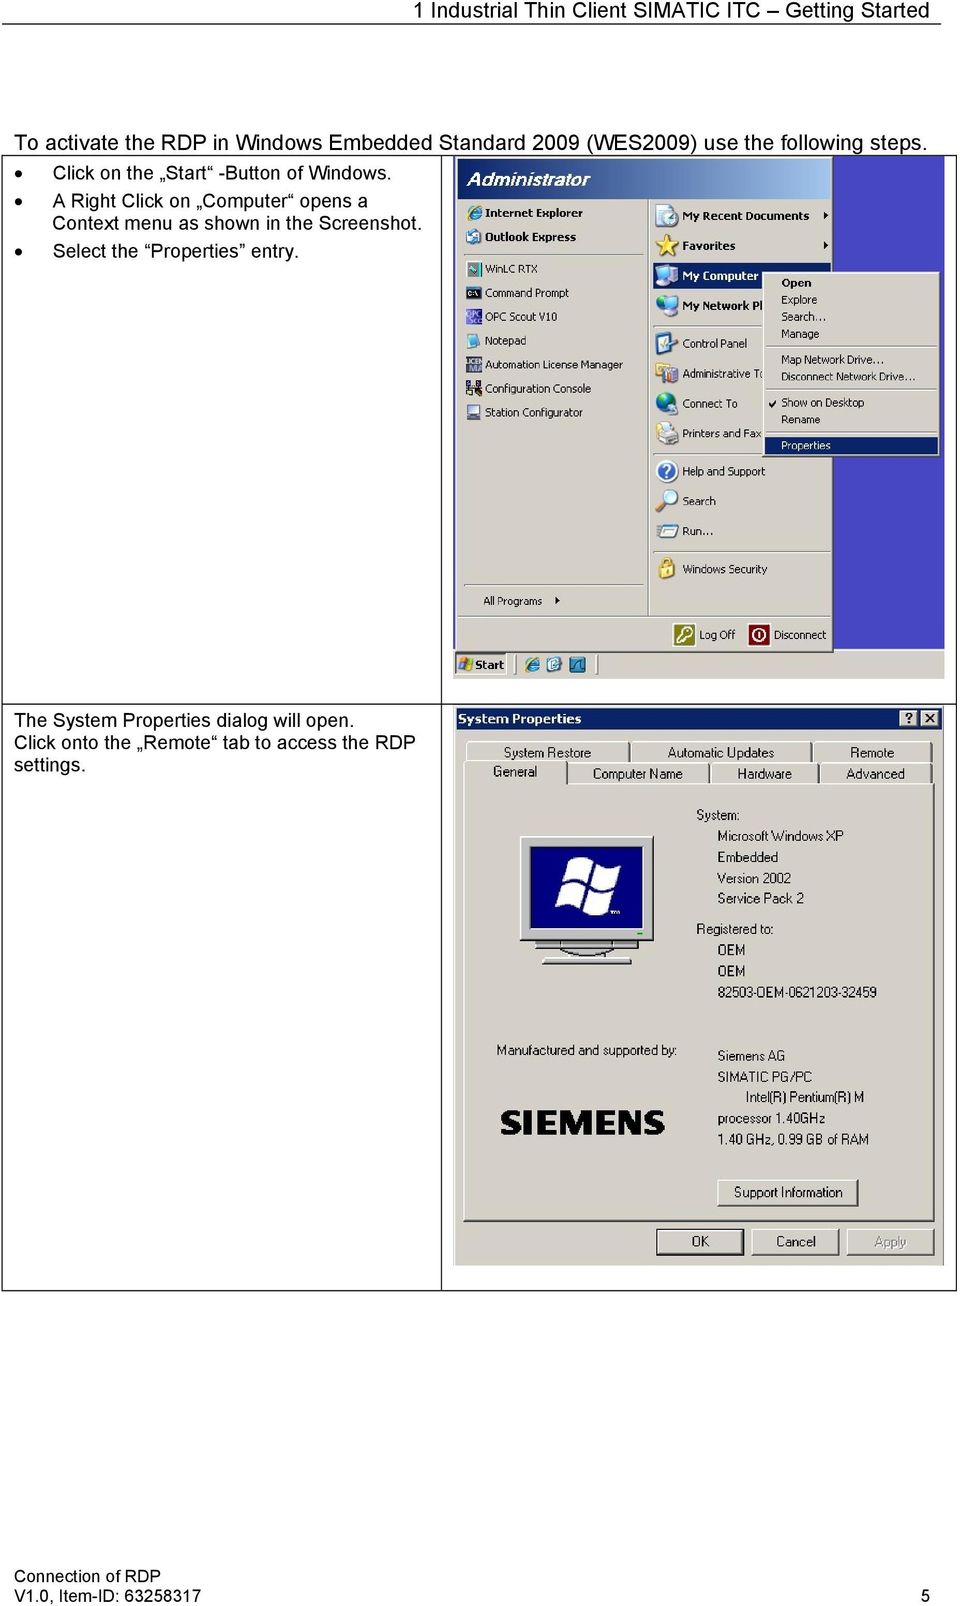 A Right Click on Computer opens a Context menu as shown in the Screenshot.